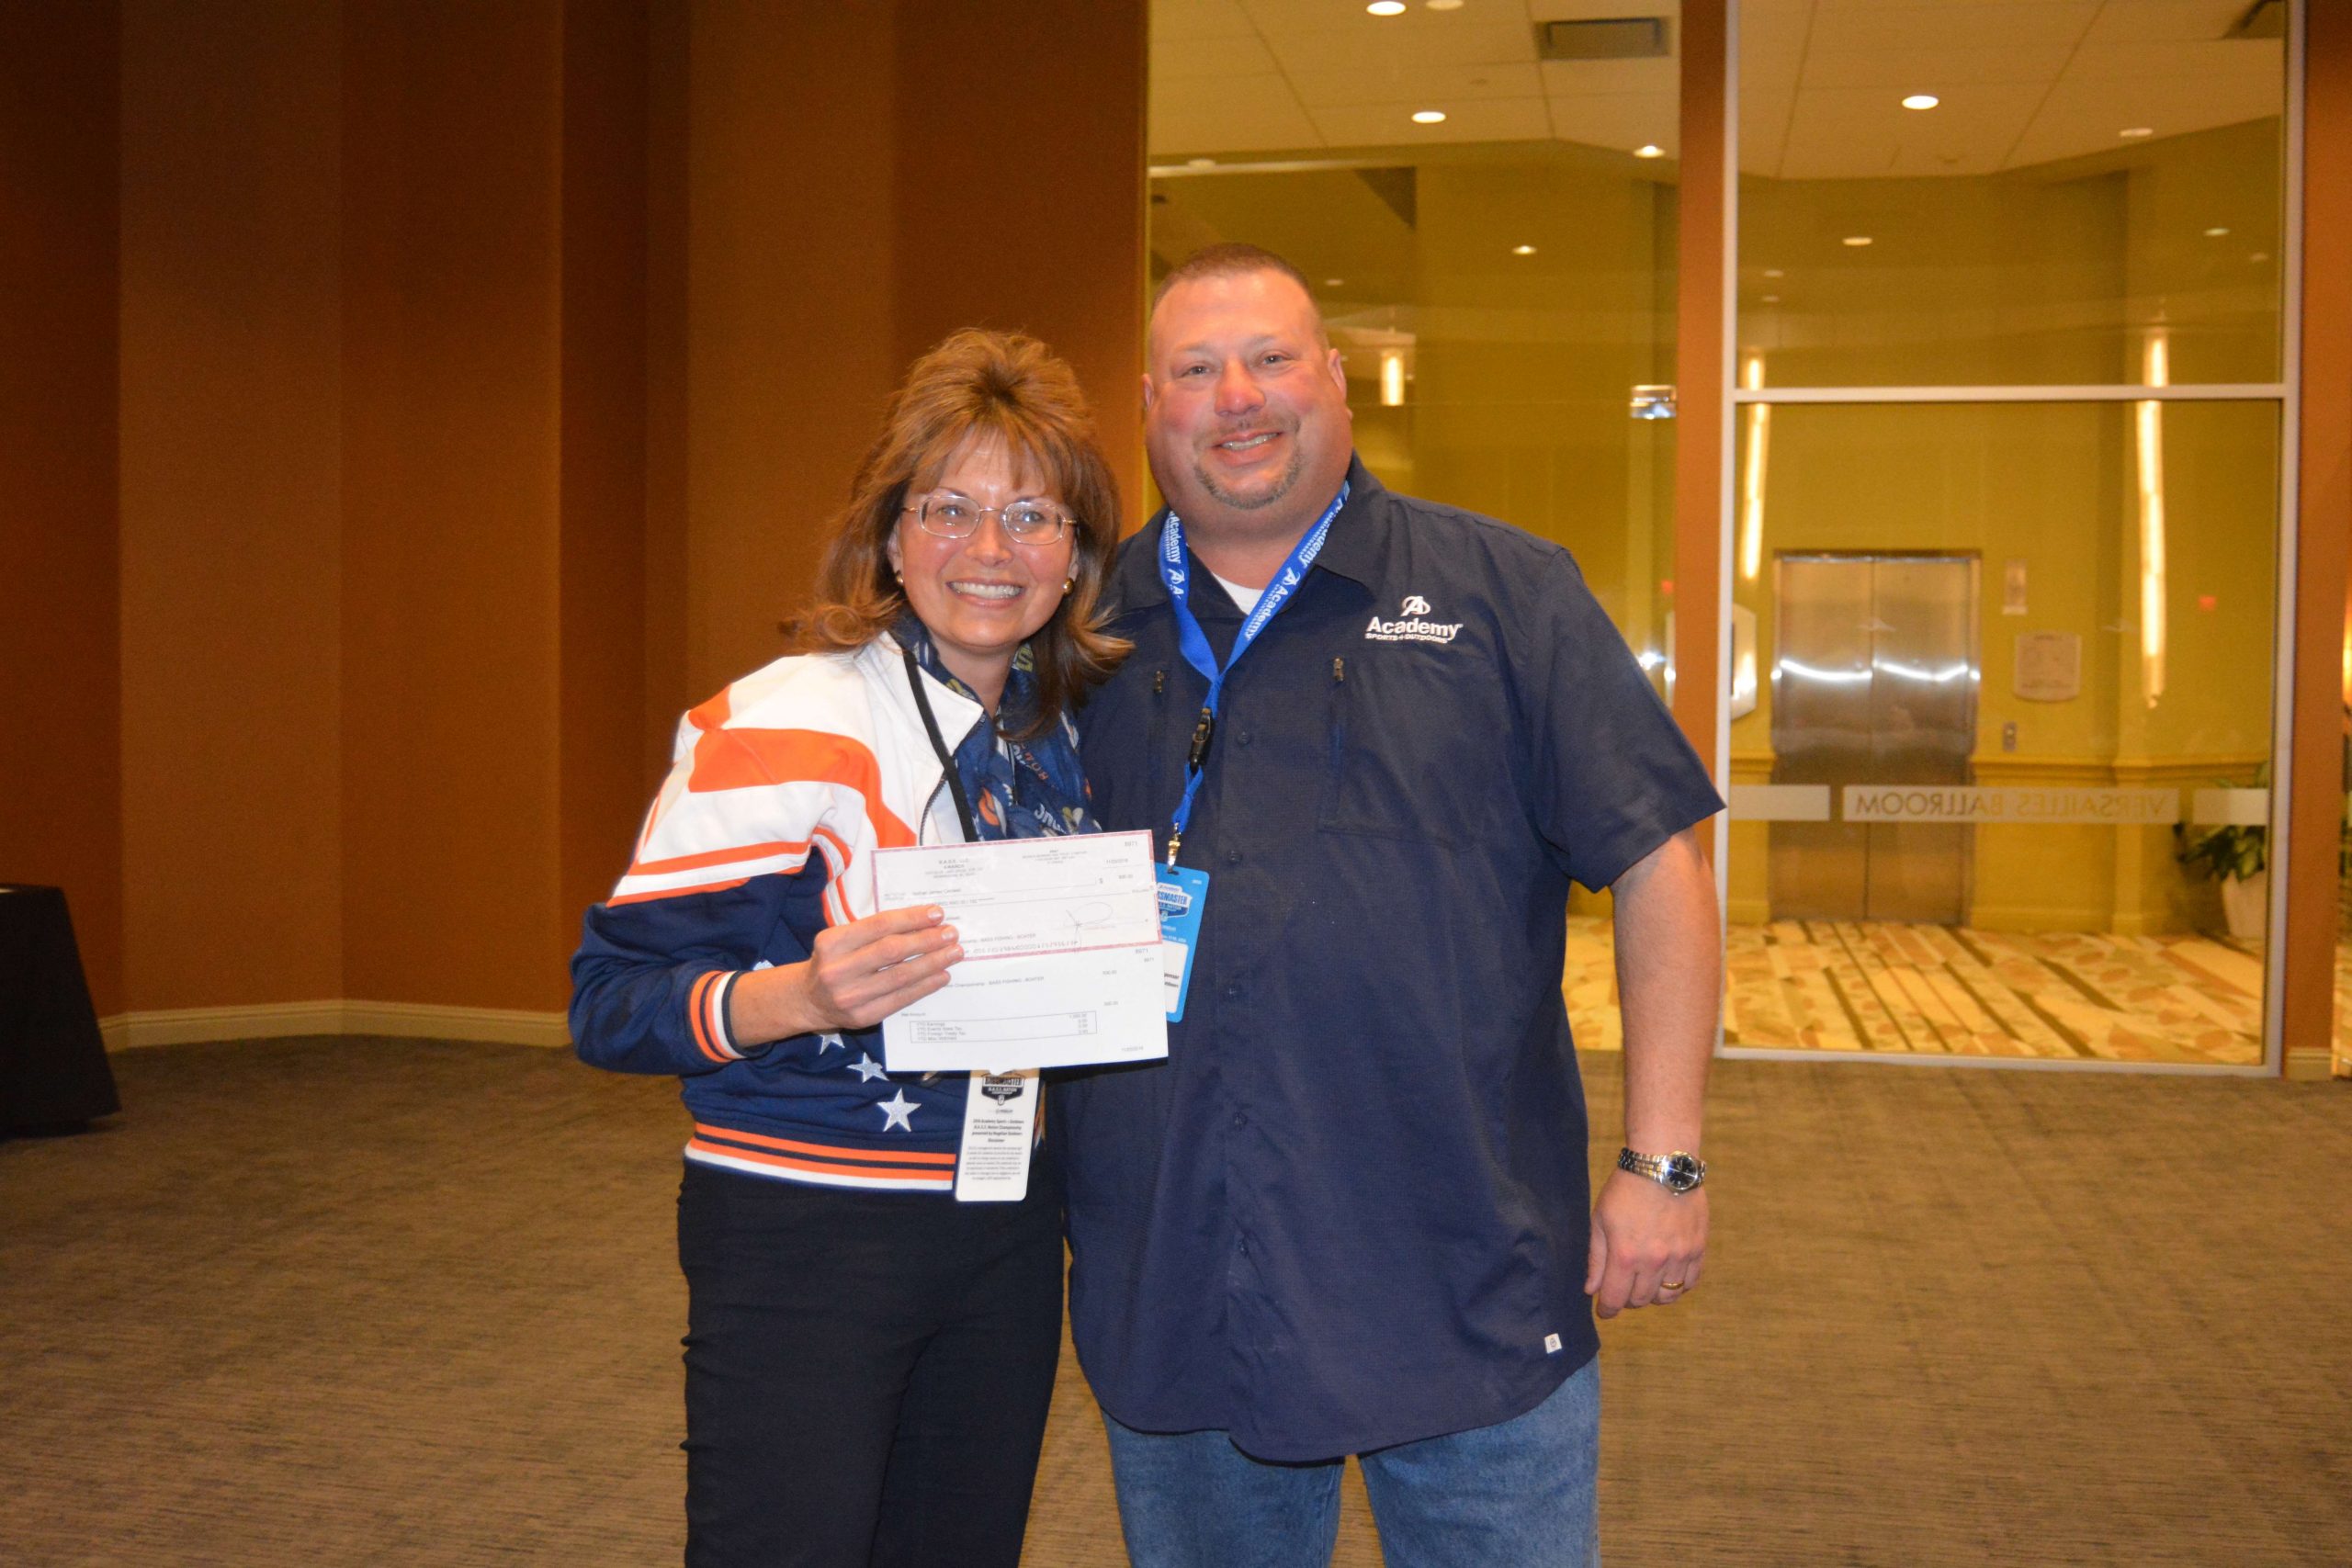 Audrey McKenney, president of the Colorado B.A.S.S. Nation, accepts a cash award on behalf of Colorado's Nate Caldwell, who finished in 12th place.